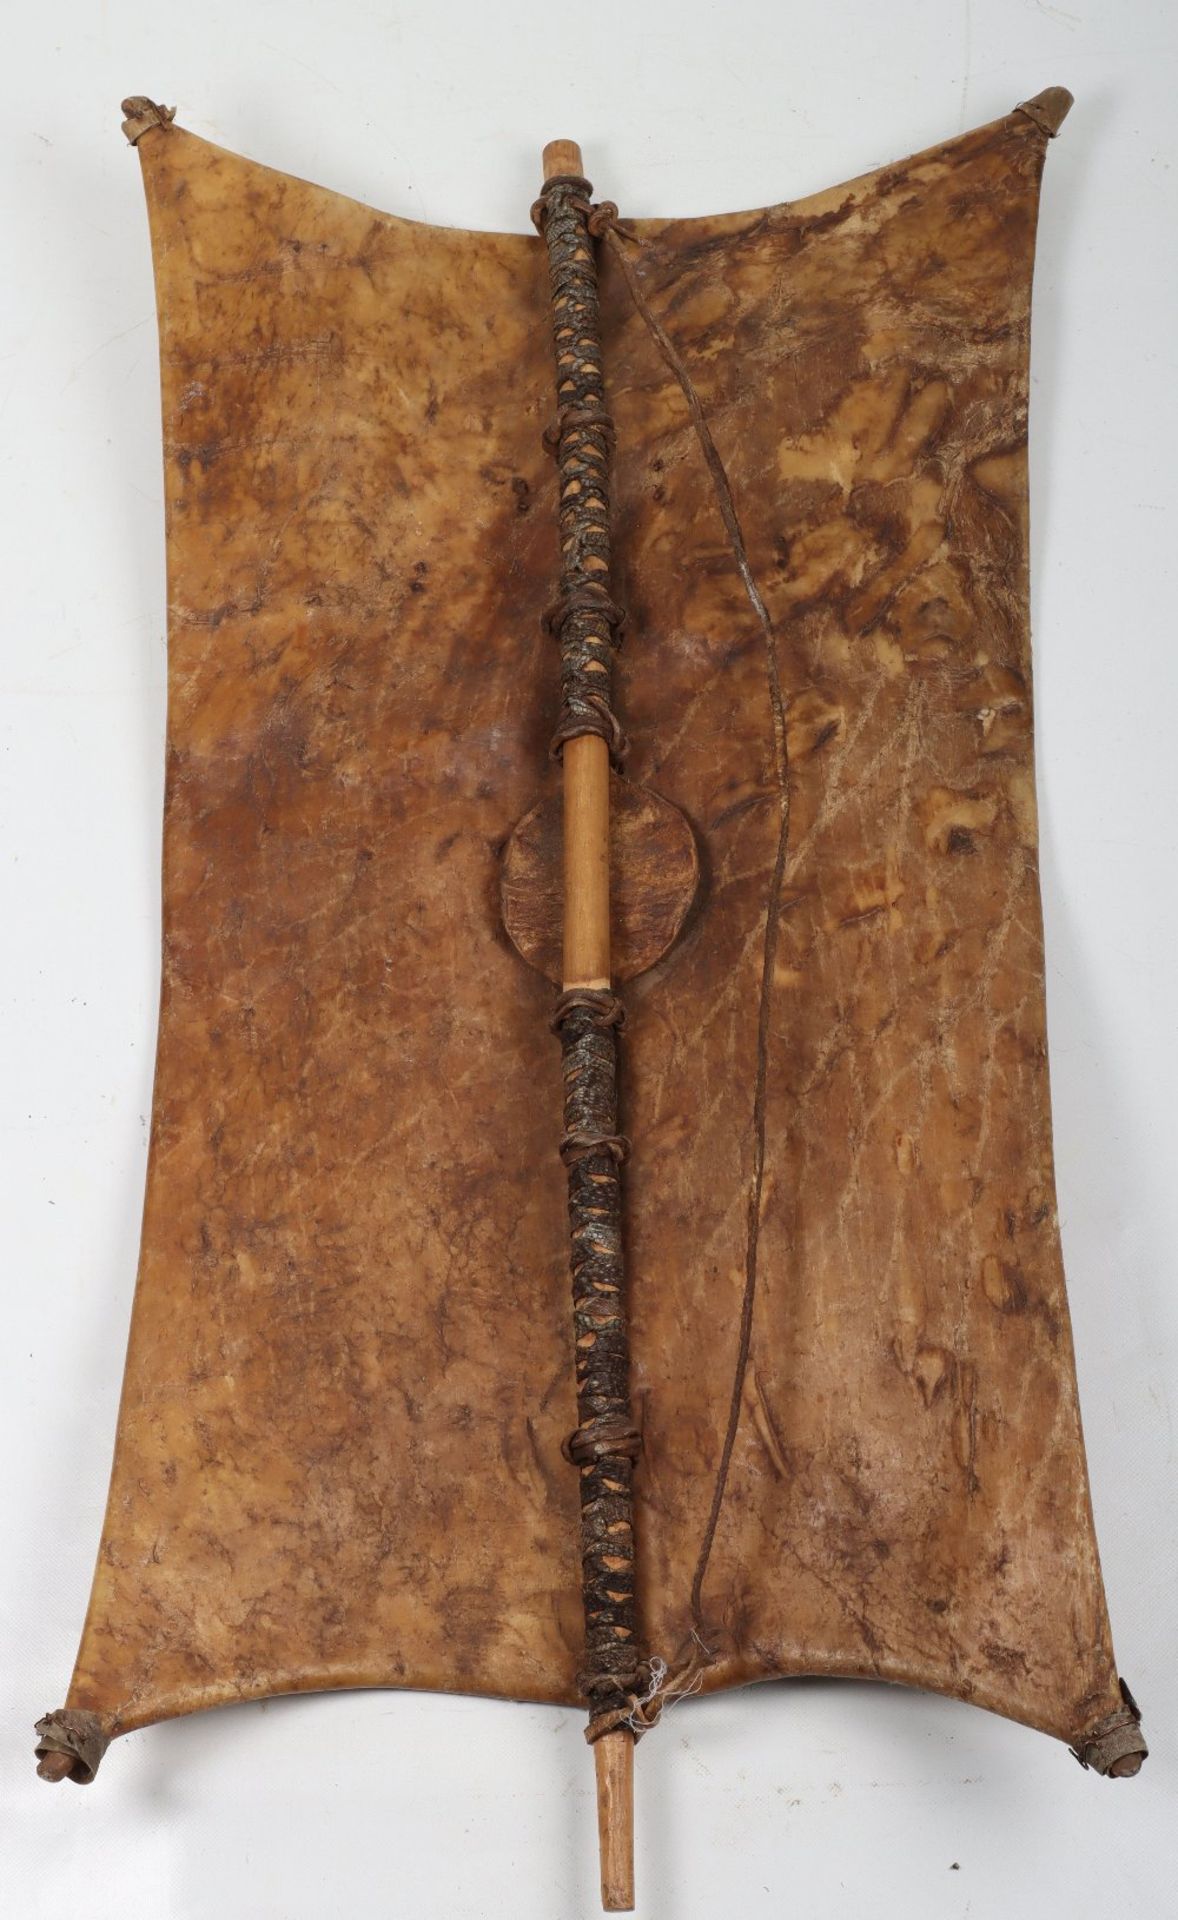 Rare Lango Dinka Tribal Hide Shield Probably Brought Back by an Officer from the 1901 Lango Expediti - Bild 8 aus 8